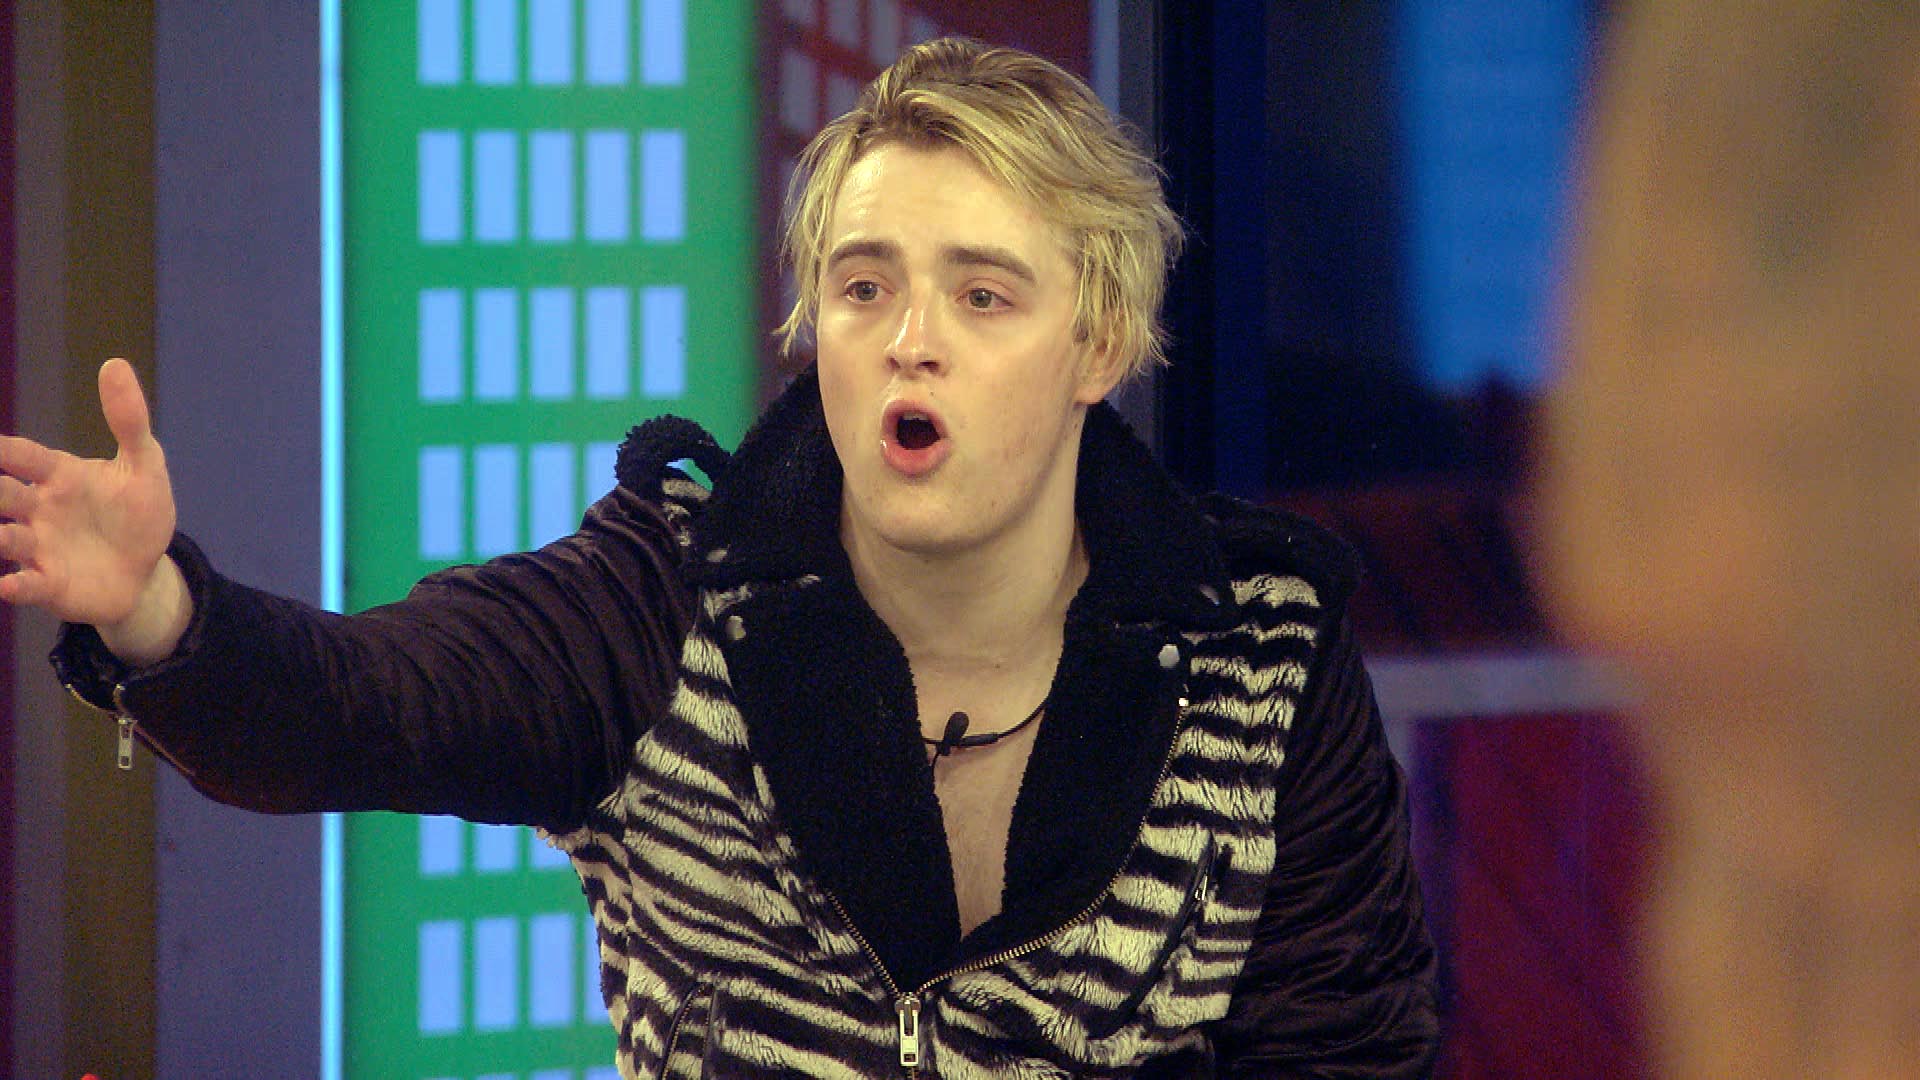 Day 28: HIGHLIGHTS: One Housemate leaves and Calum argues with Jedward